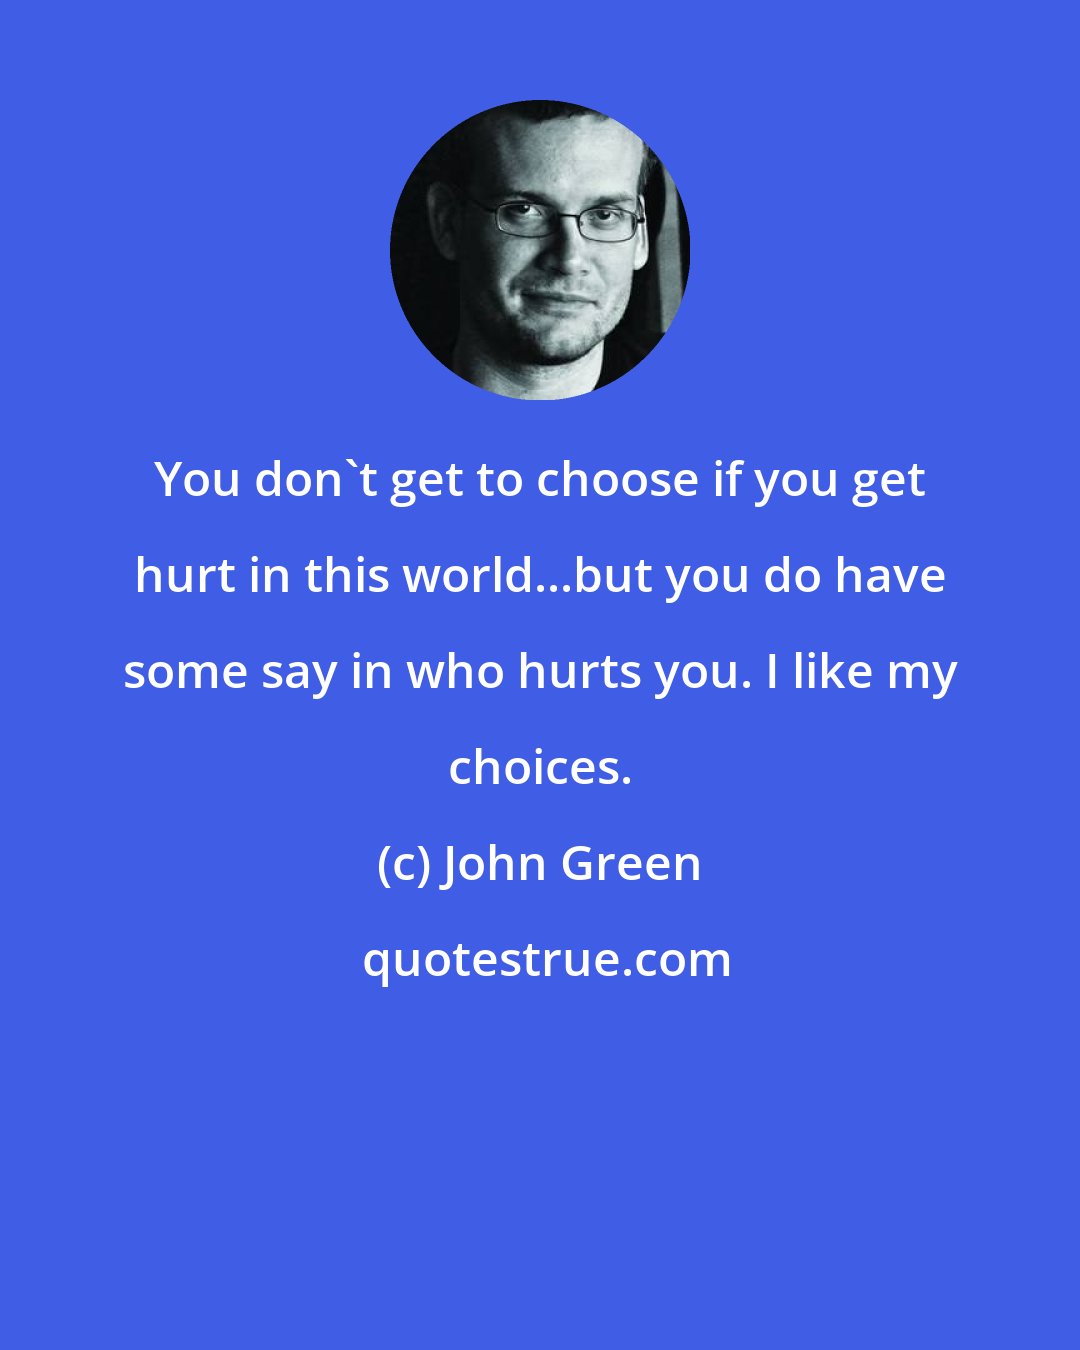 John Green: You don't get to choose if you get hurt in this world...but you do have some say in who hurts you. I like my choices.